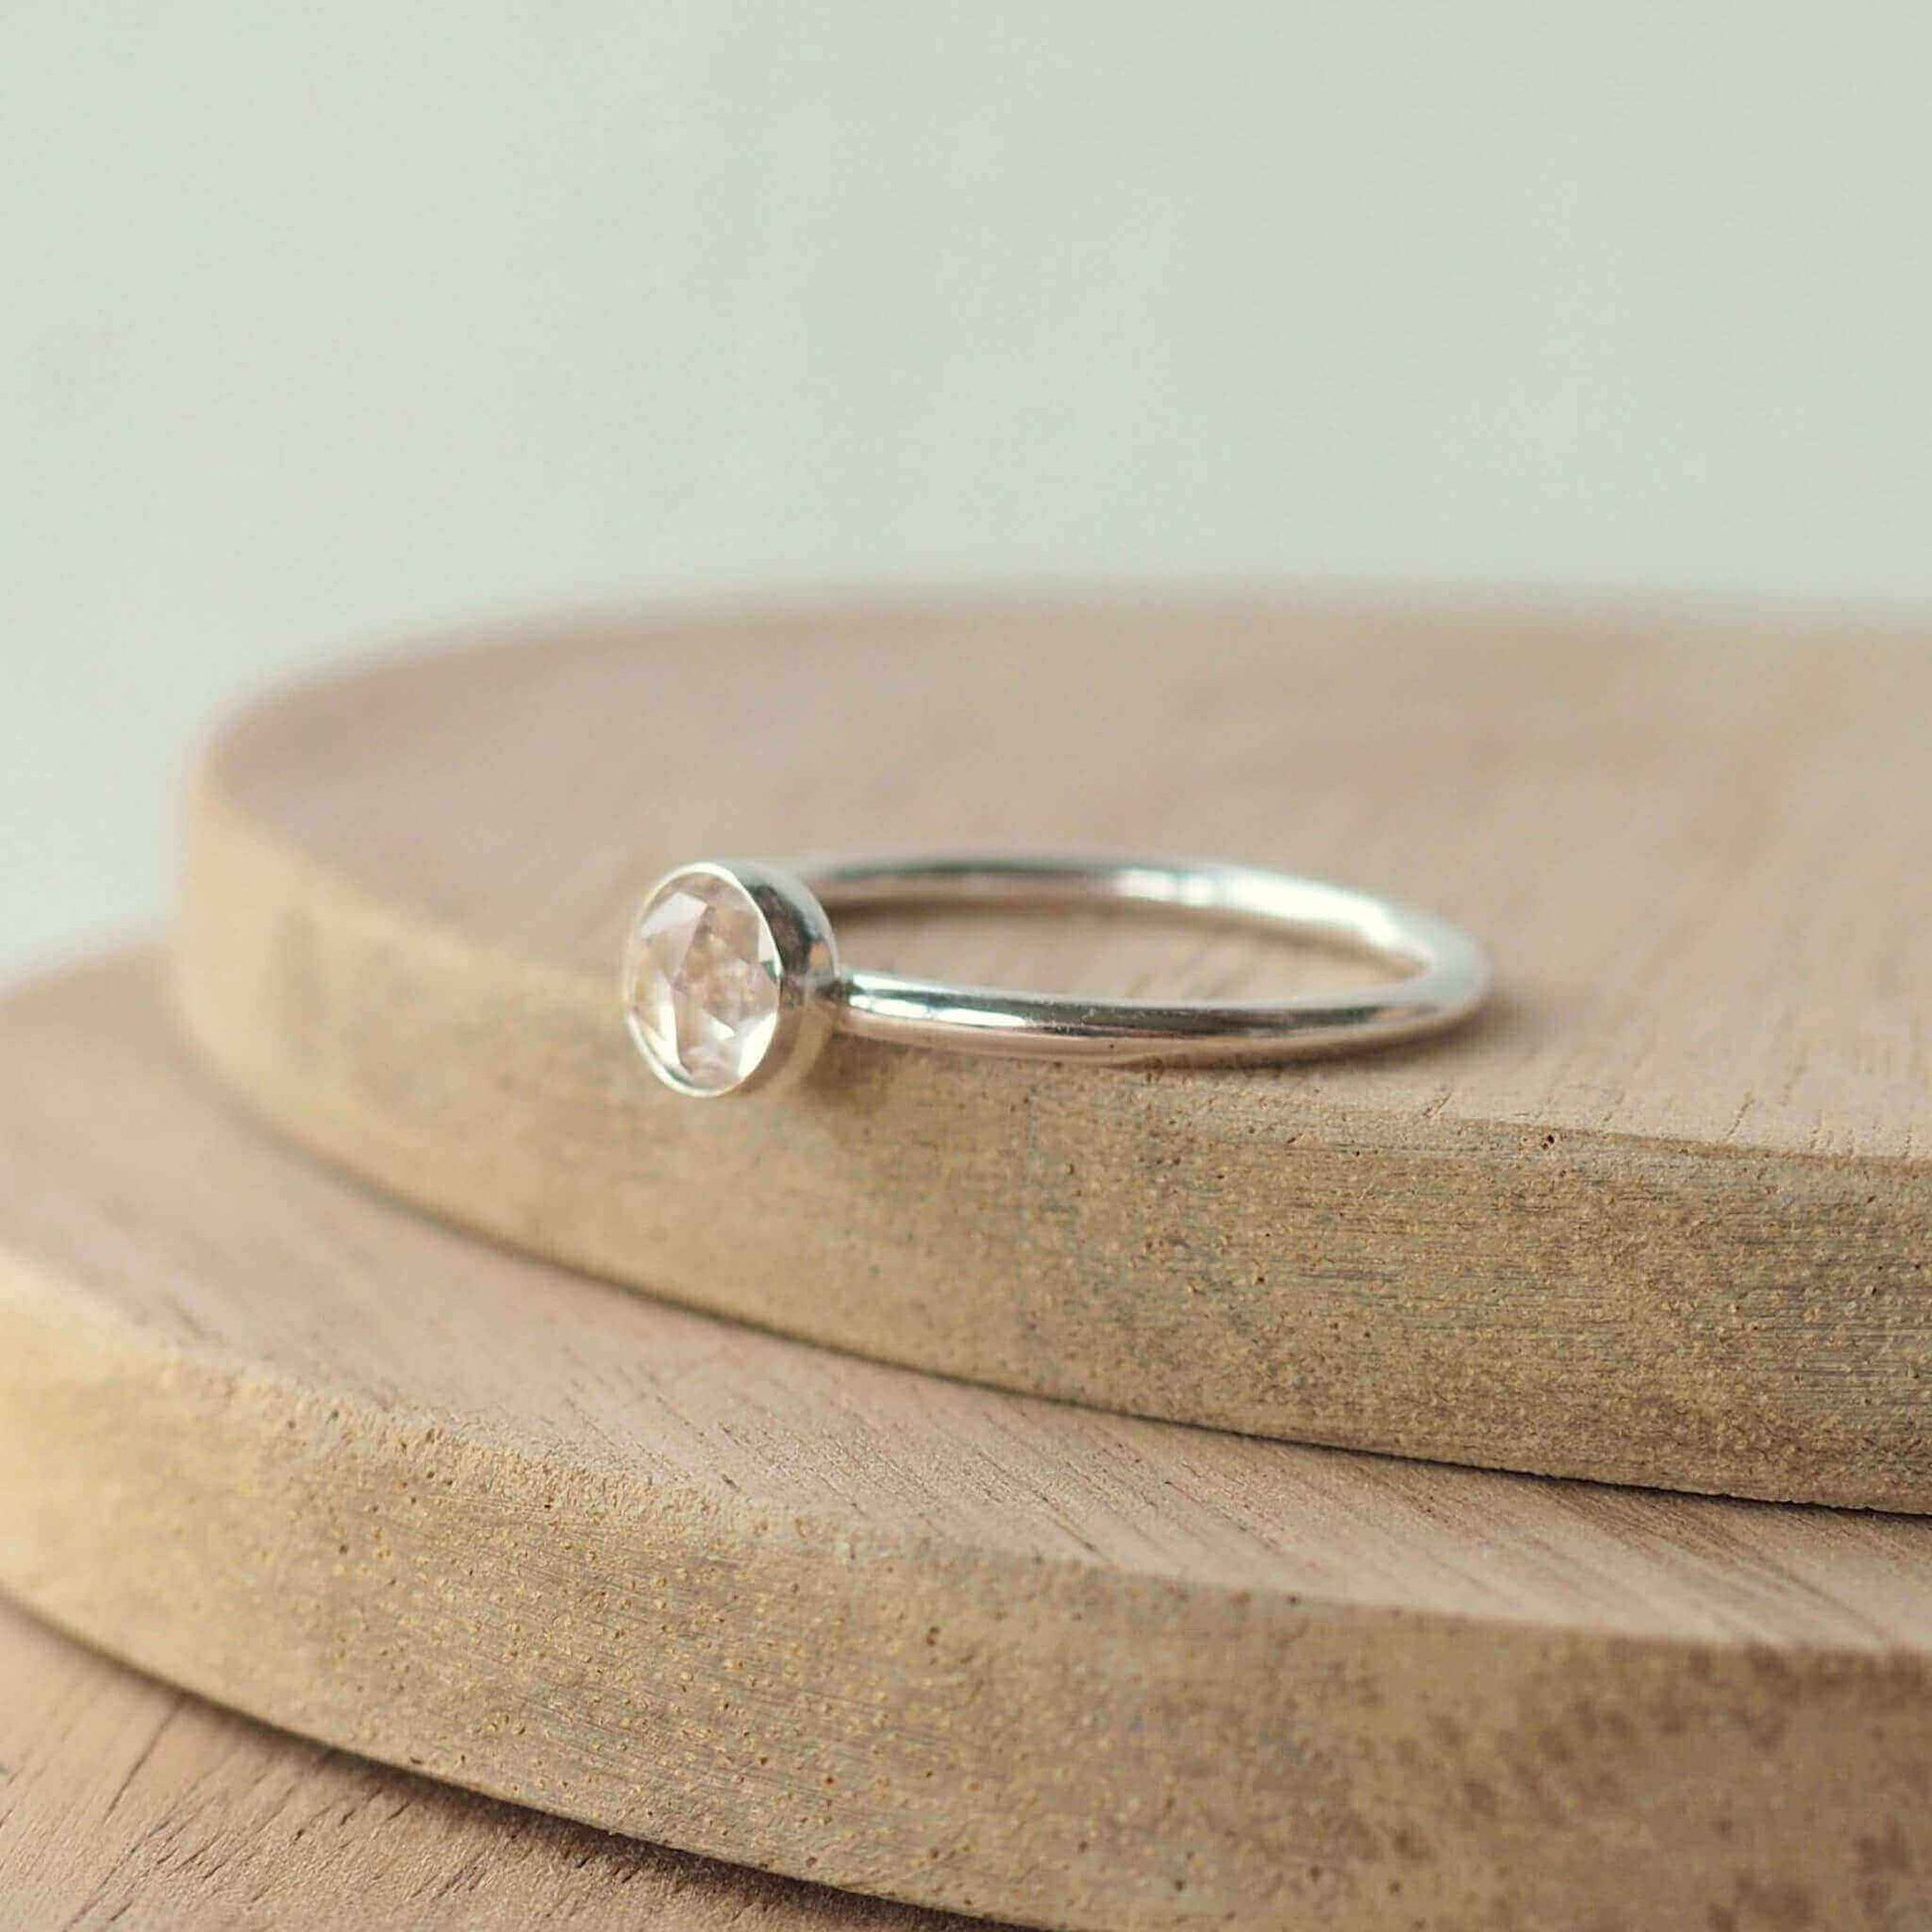 Solitaire silver ring in a modern style. Round band ring with a 5mm round white topaz with facets set very simply and minimalistic in style. Ring is on a wooden background. Handmade in Scotland by Maram Jewellery